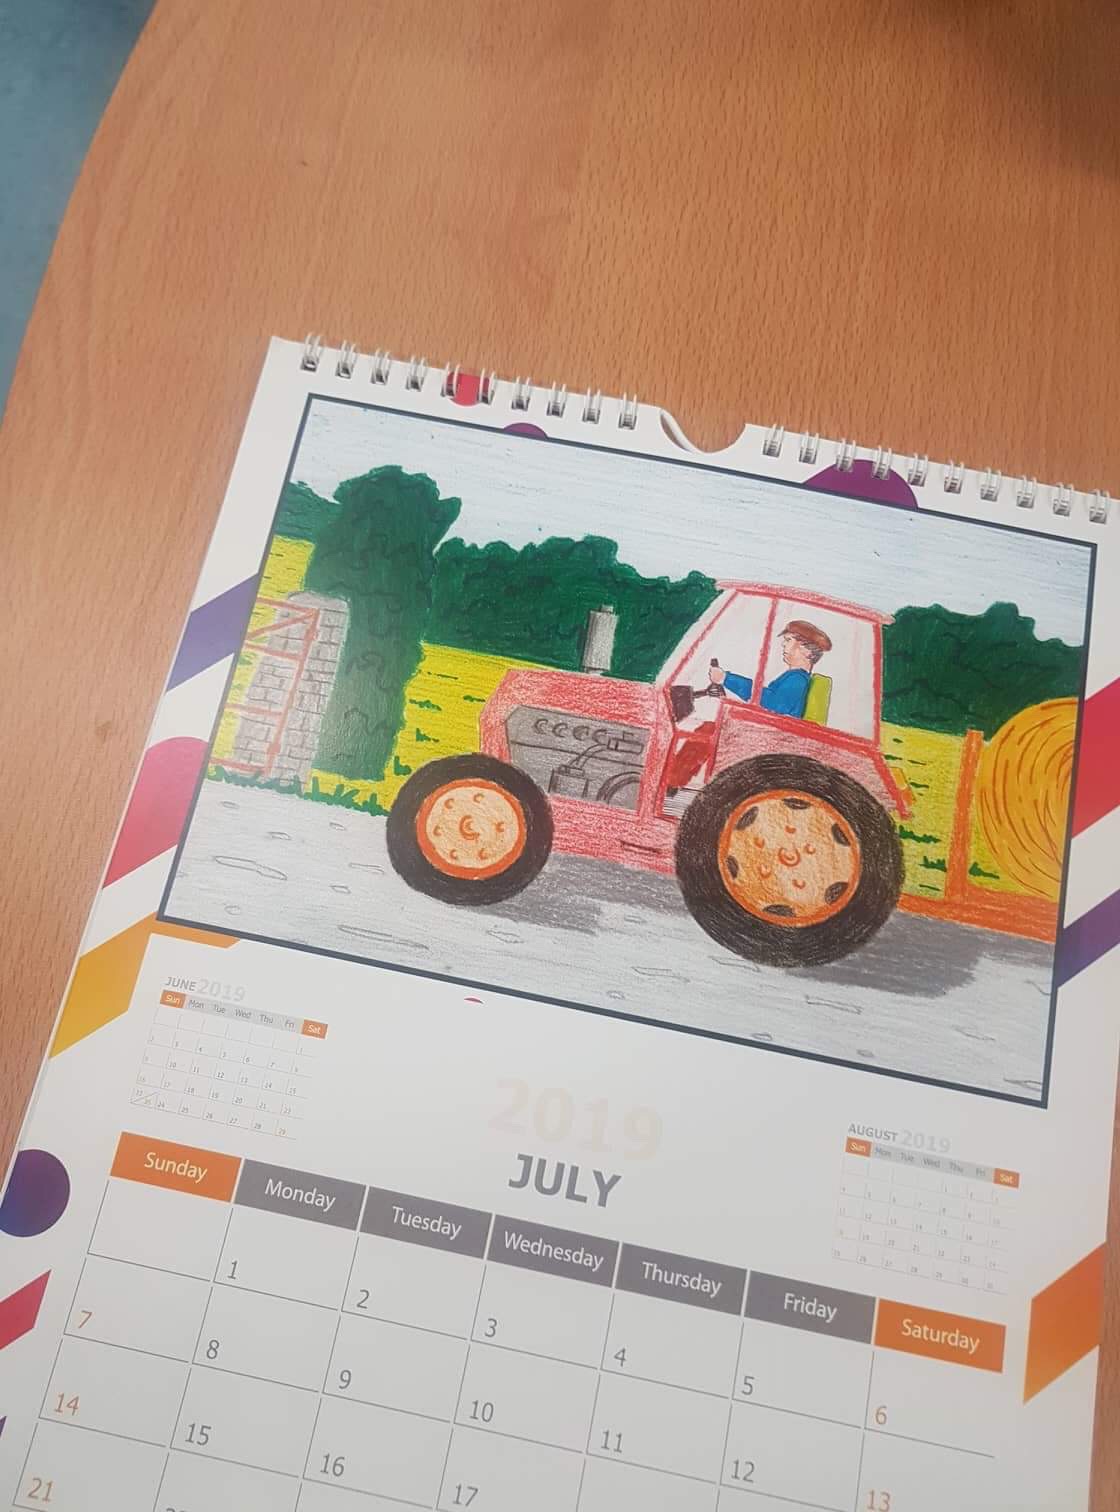 Images from the School Calendar